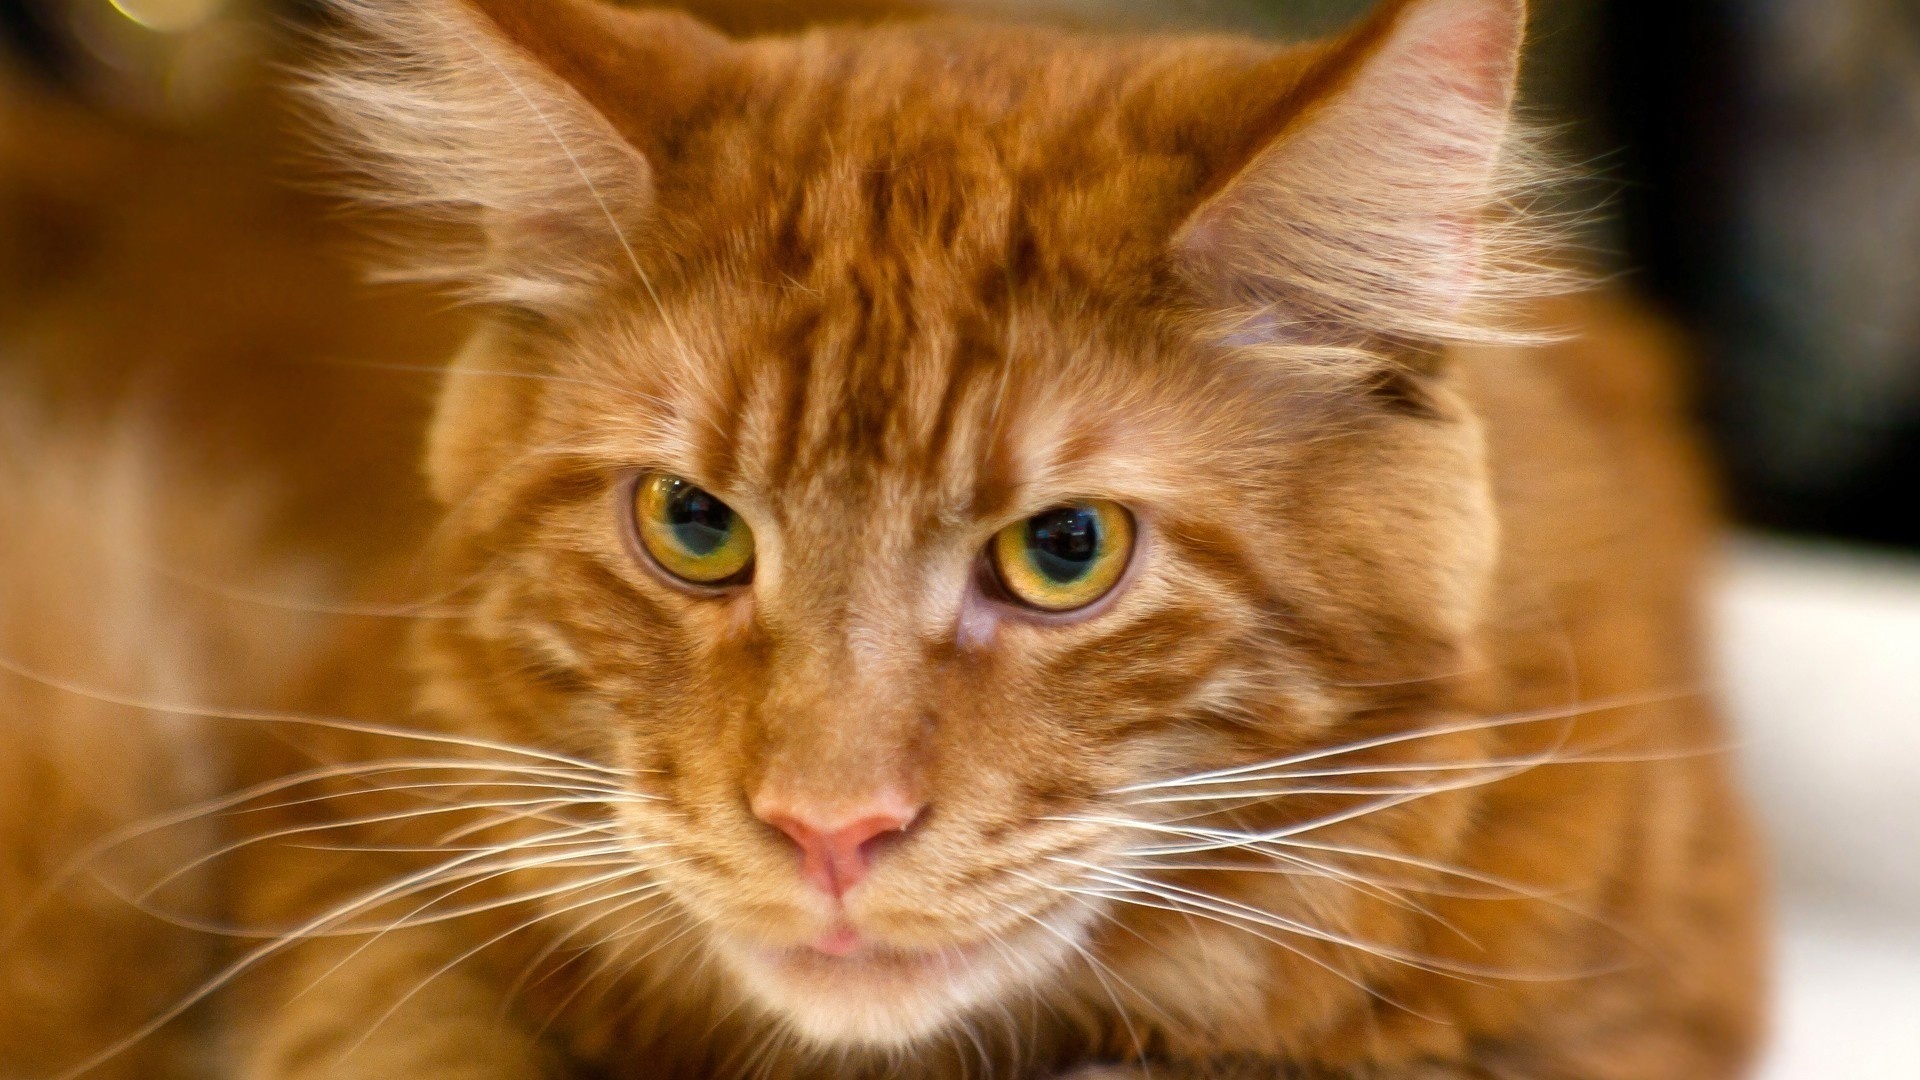 Звери в теме;) - Страница 9 Animals___Cats_Red_Cat_Maine_coon_close-up_044938_